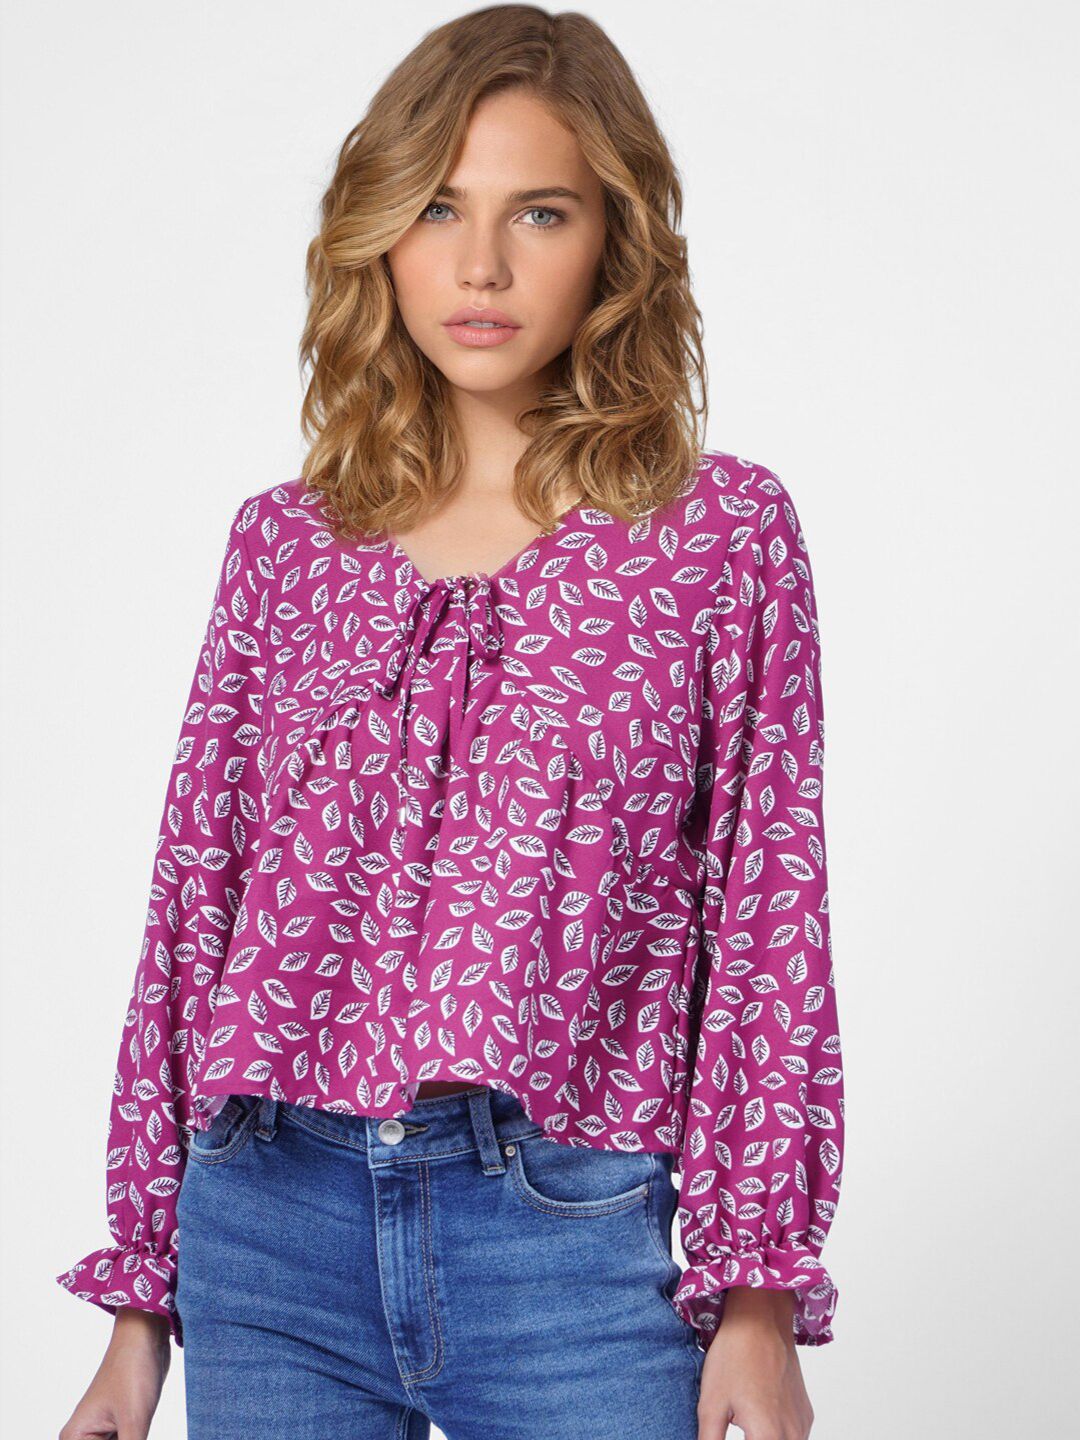 ONLY Women Magenta & White Tropical Printed Empire Top Price in India